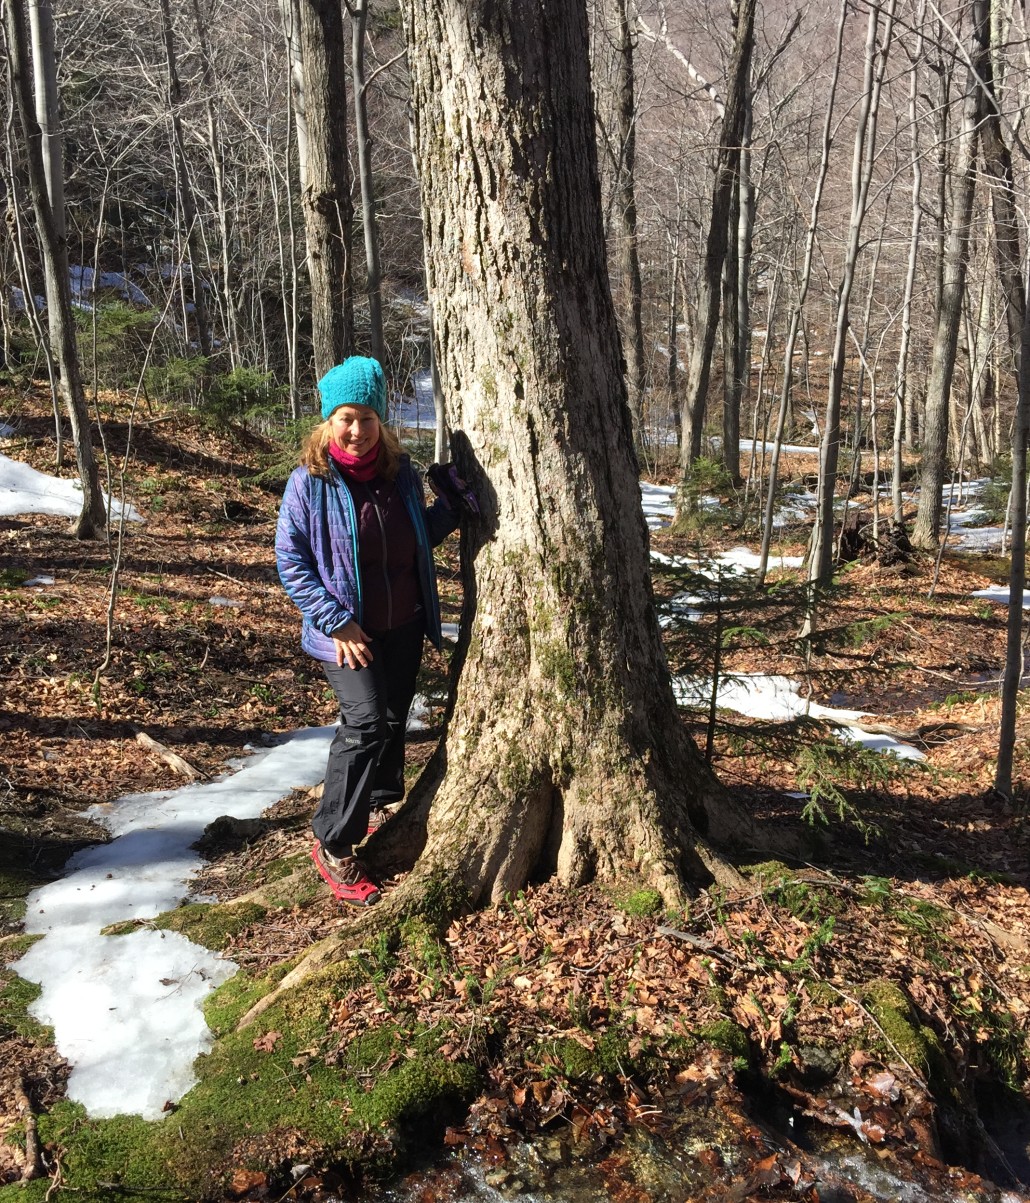 Enjoying early spring on Mad River Glen's nature hike